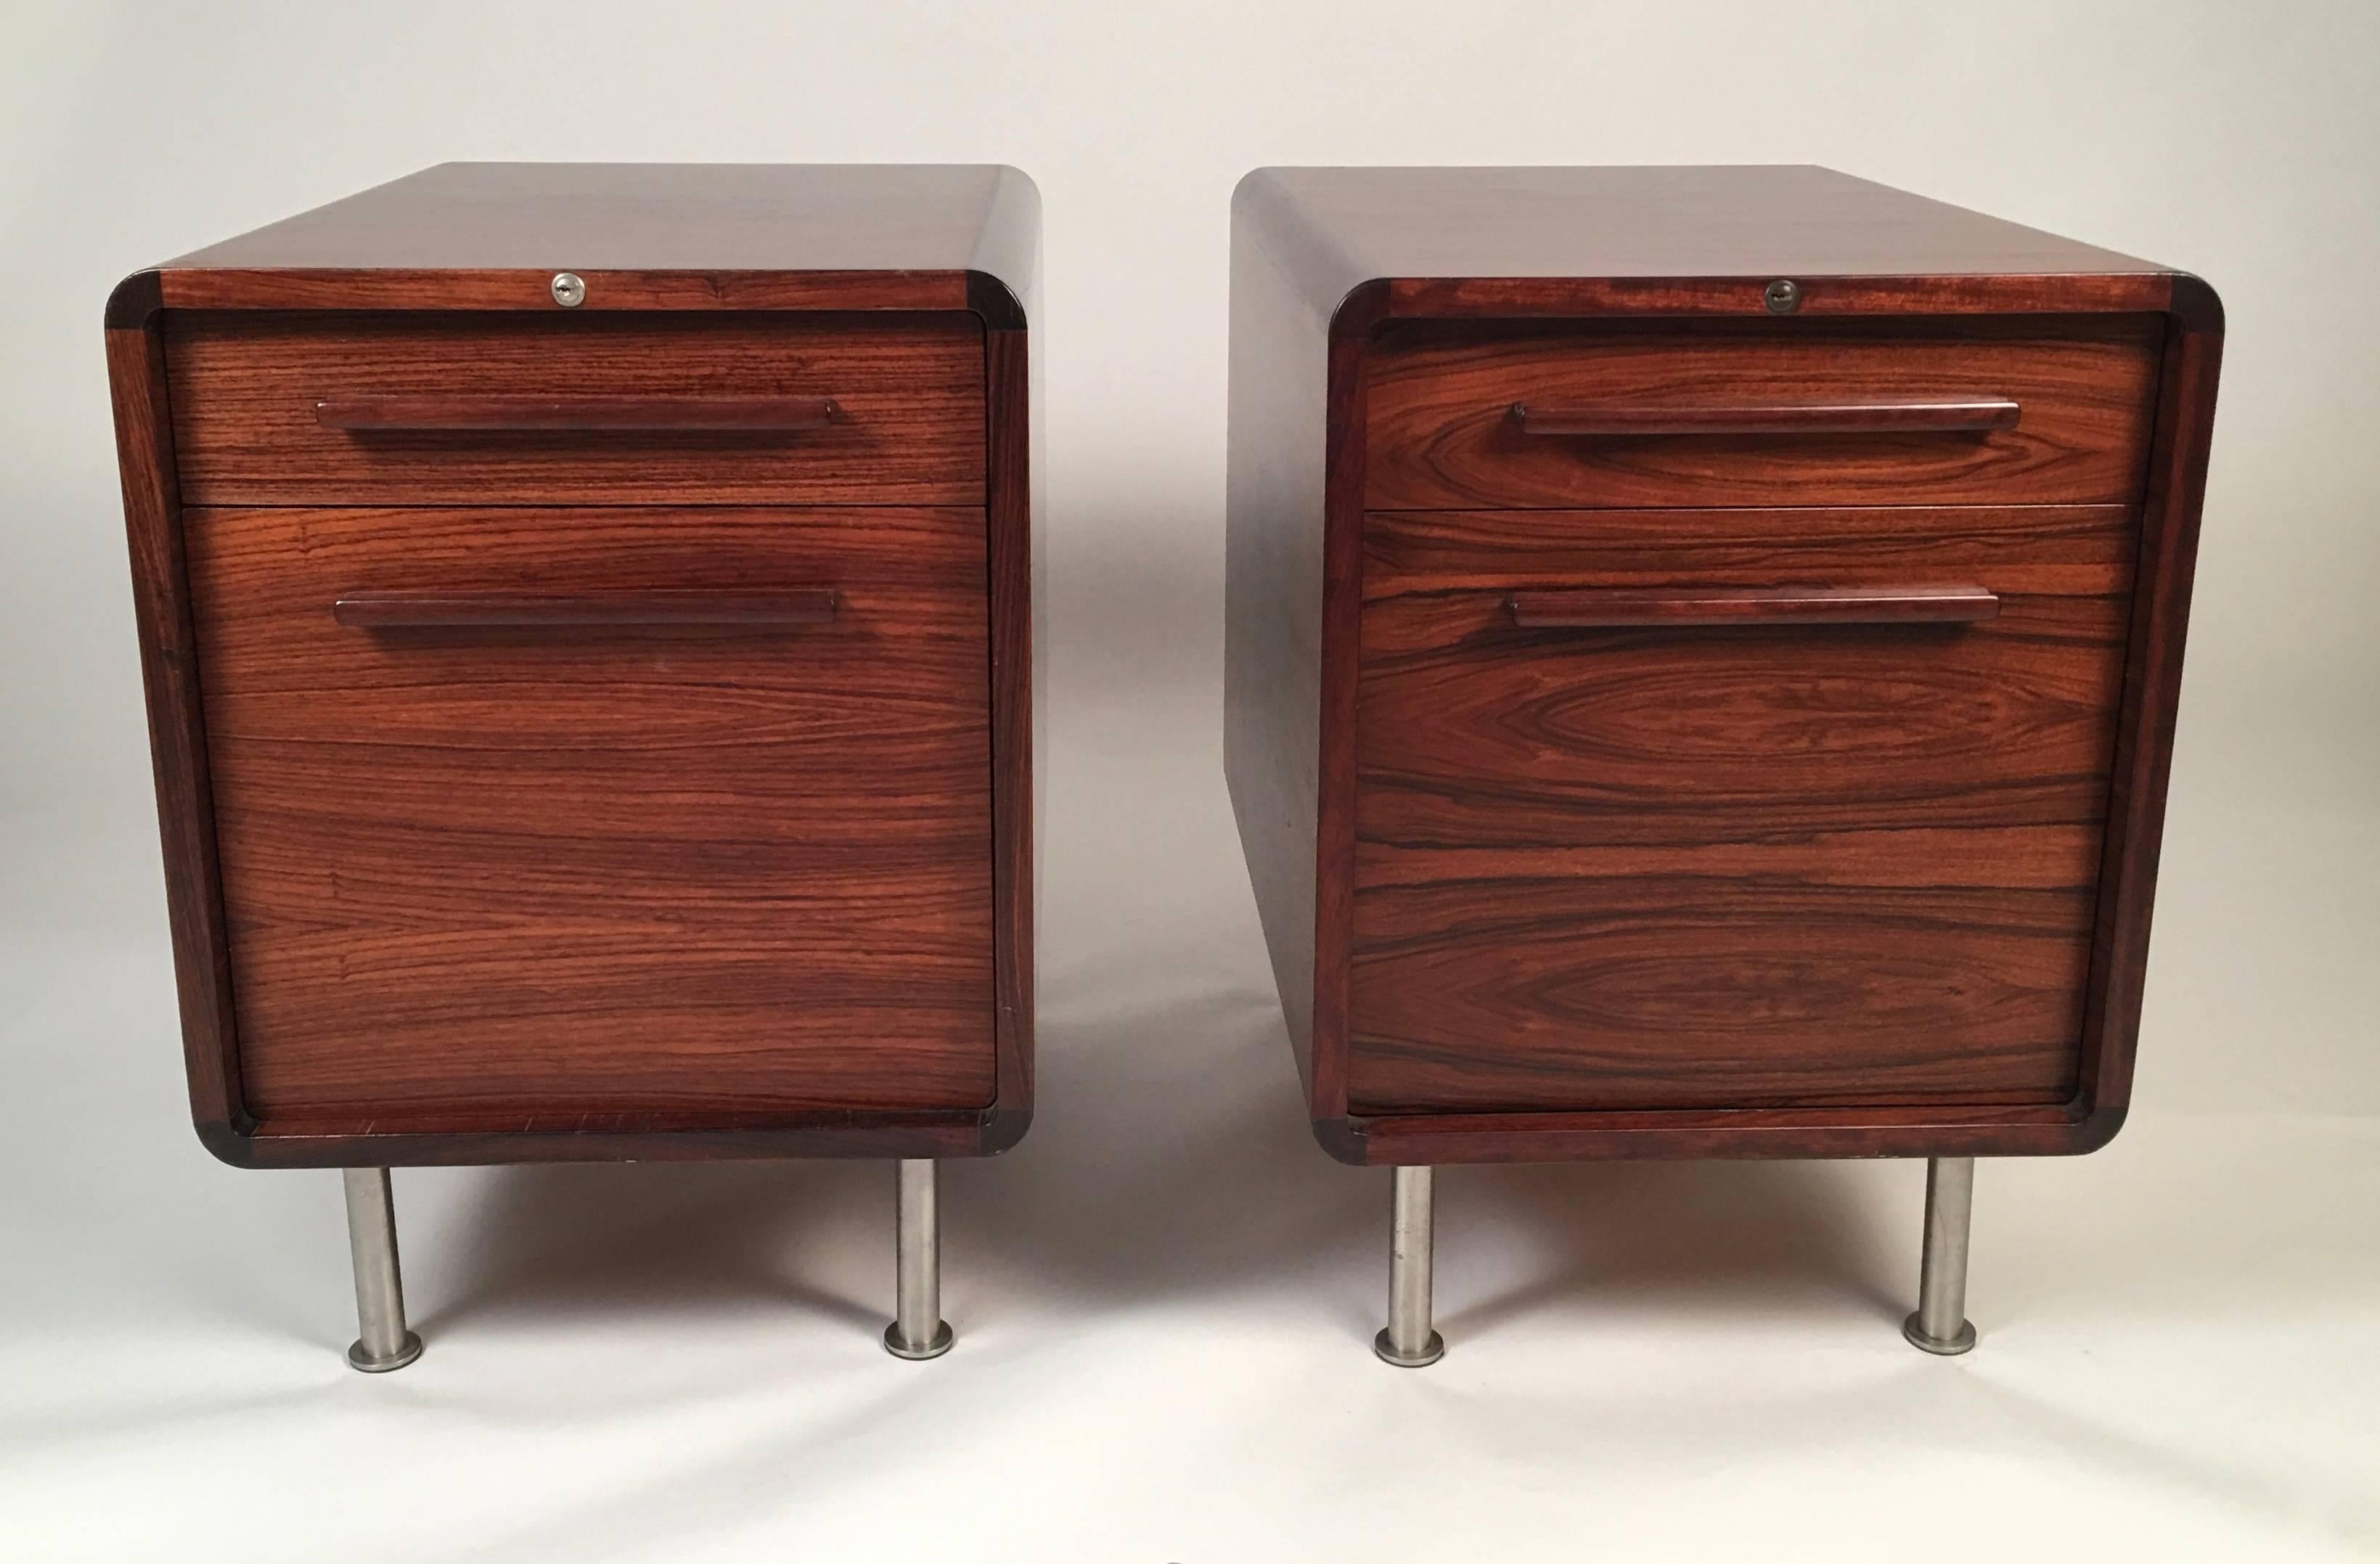 Pair of Danish cabinets, perfect as nightstands, in rosewood from the 1970s, made by Dyrlund, of rectangular form with rounded corners, and long rectangular rosewood pulls, all veneered with richly figured and colored rosewood, with one small drawer